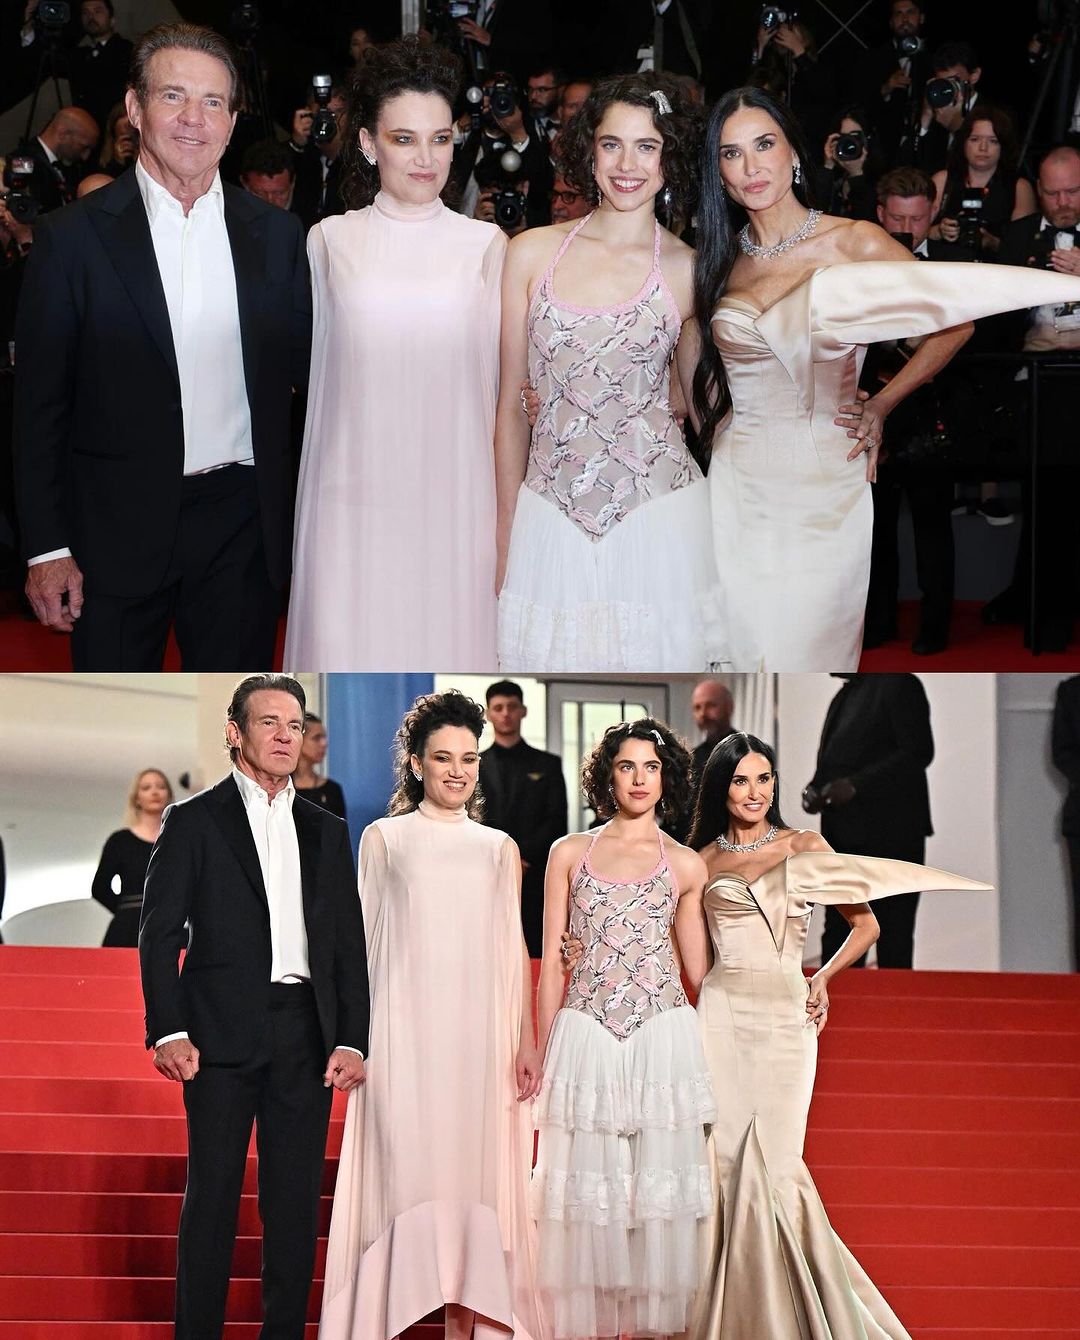 The cast and director of The Substance at the Cannes Film Festival